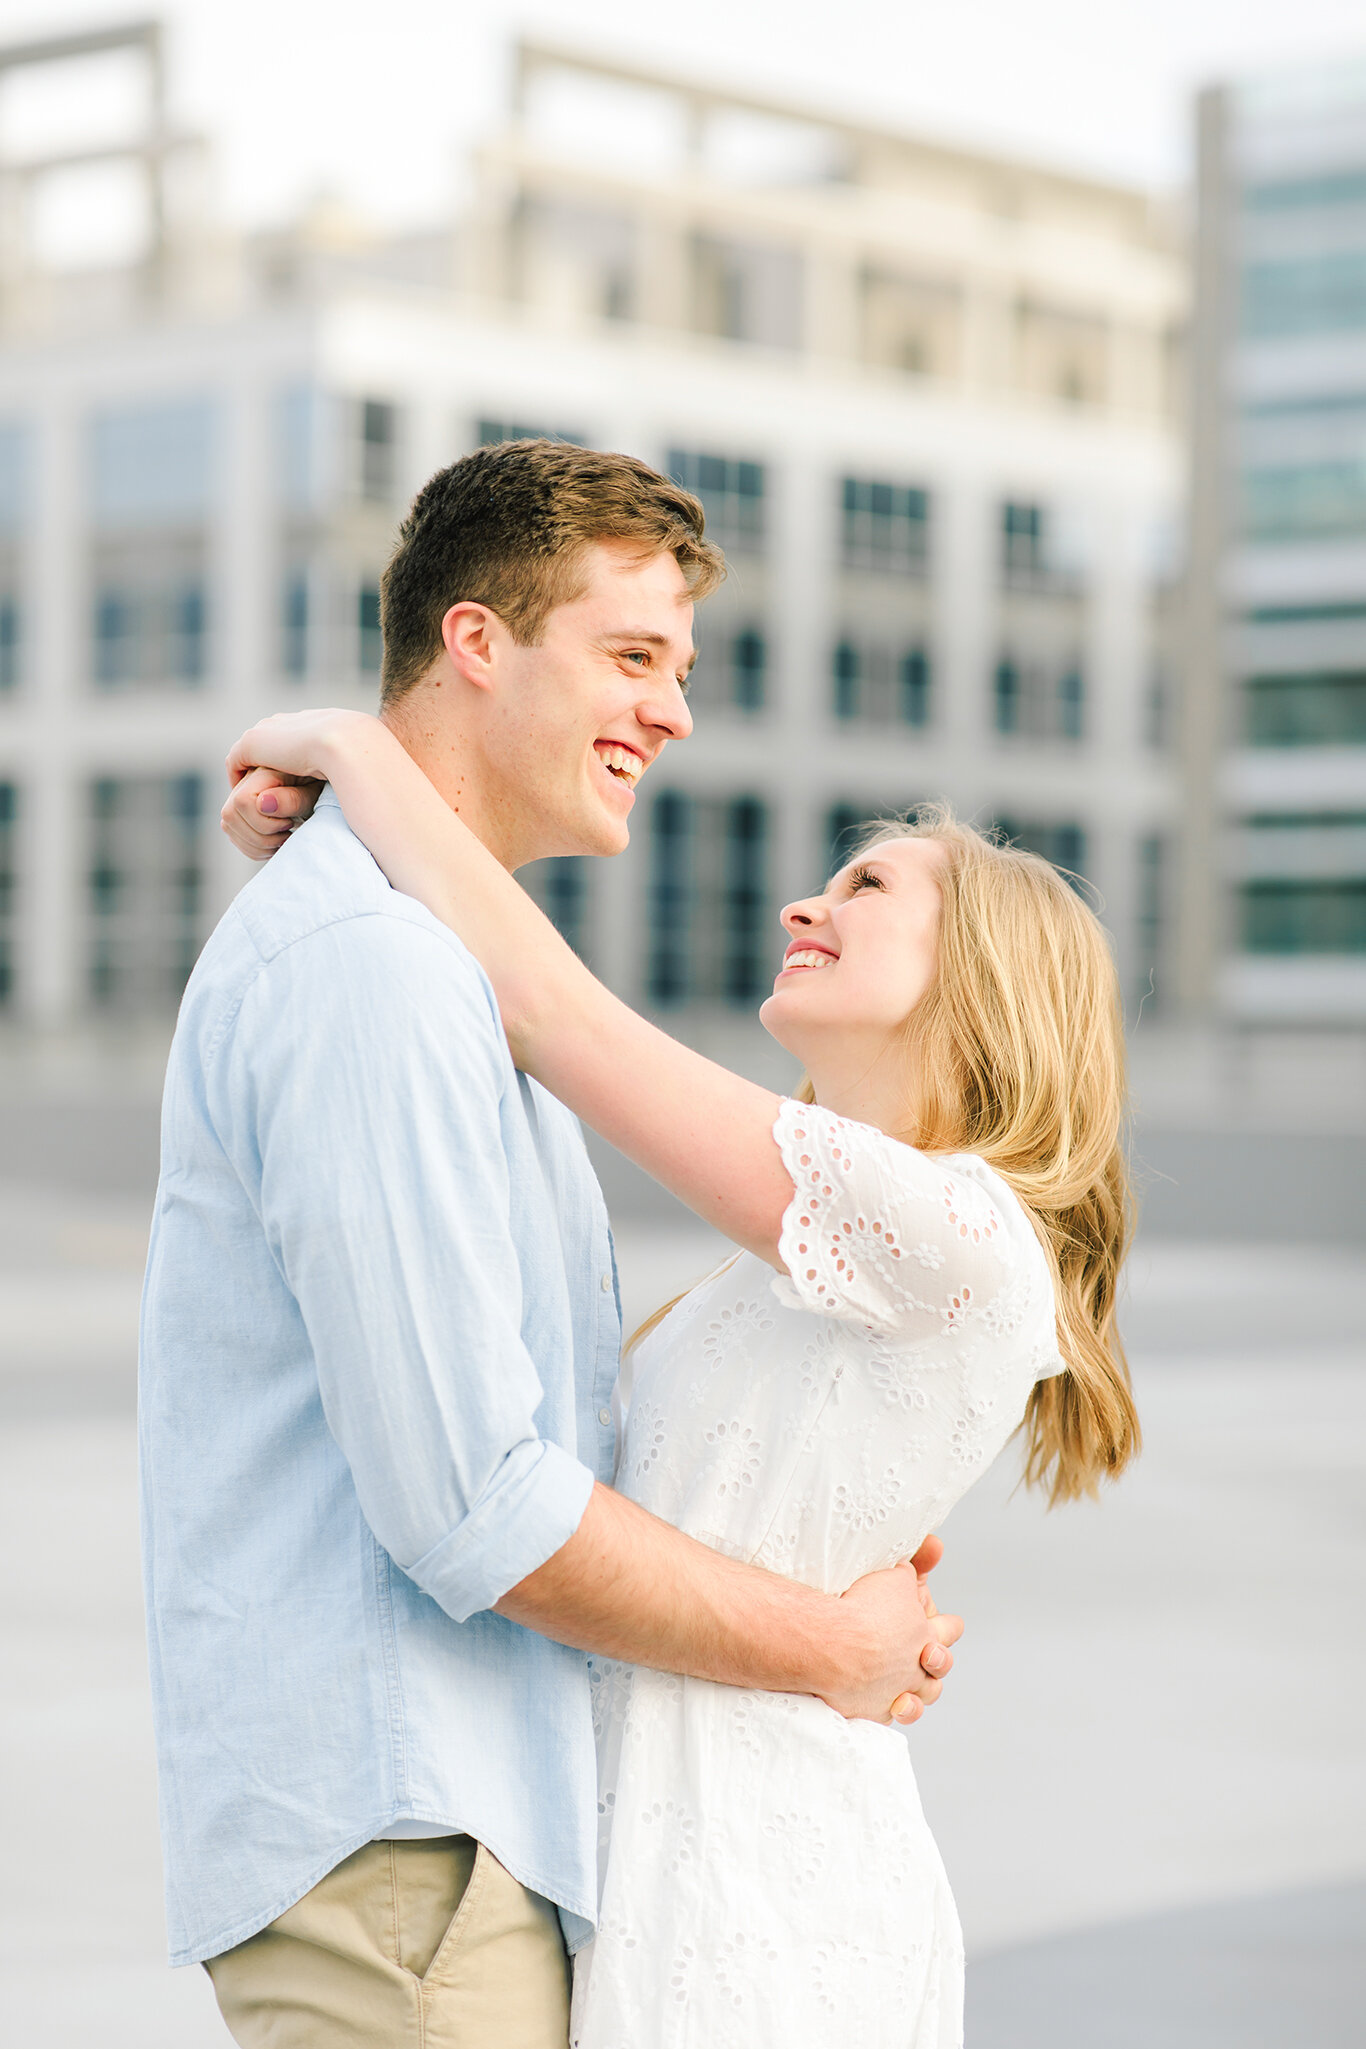  light blue collared shirt white lace short sleeve dress loose hanging curls downtown salt lake city engagement session roof top photo shoot salt lake city utah professional utah valley engagement photographer #downtownsaltlakecity #engagements #utah